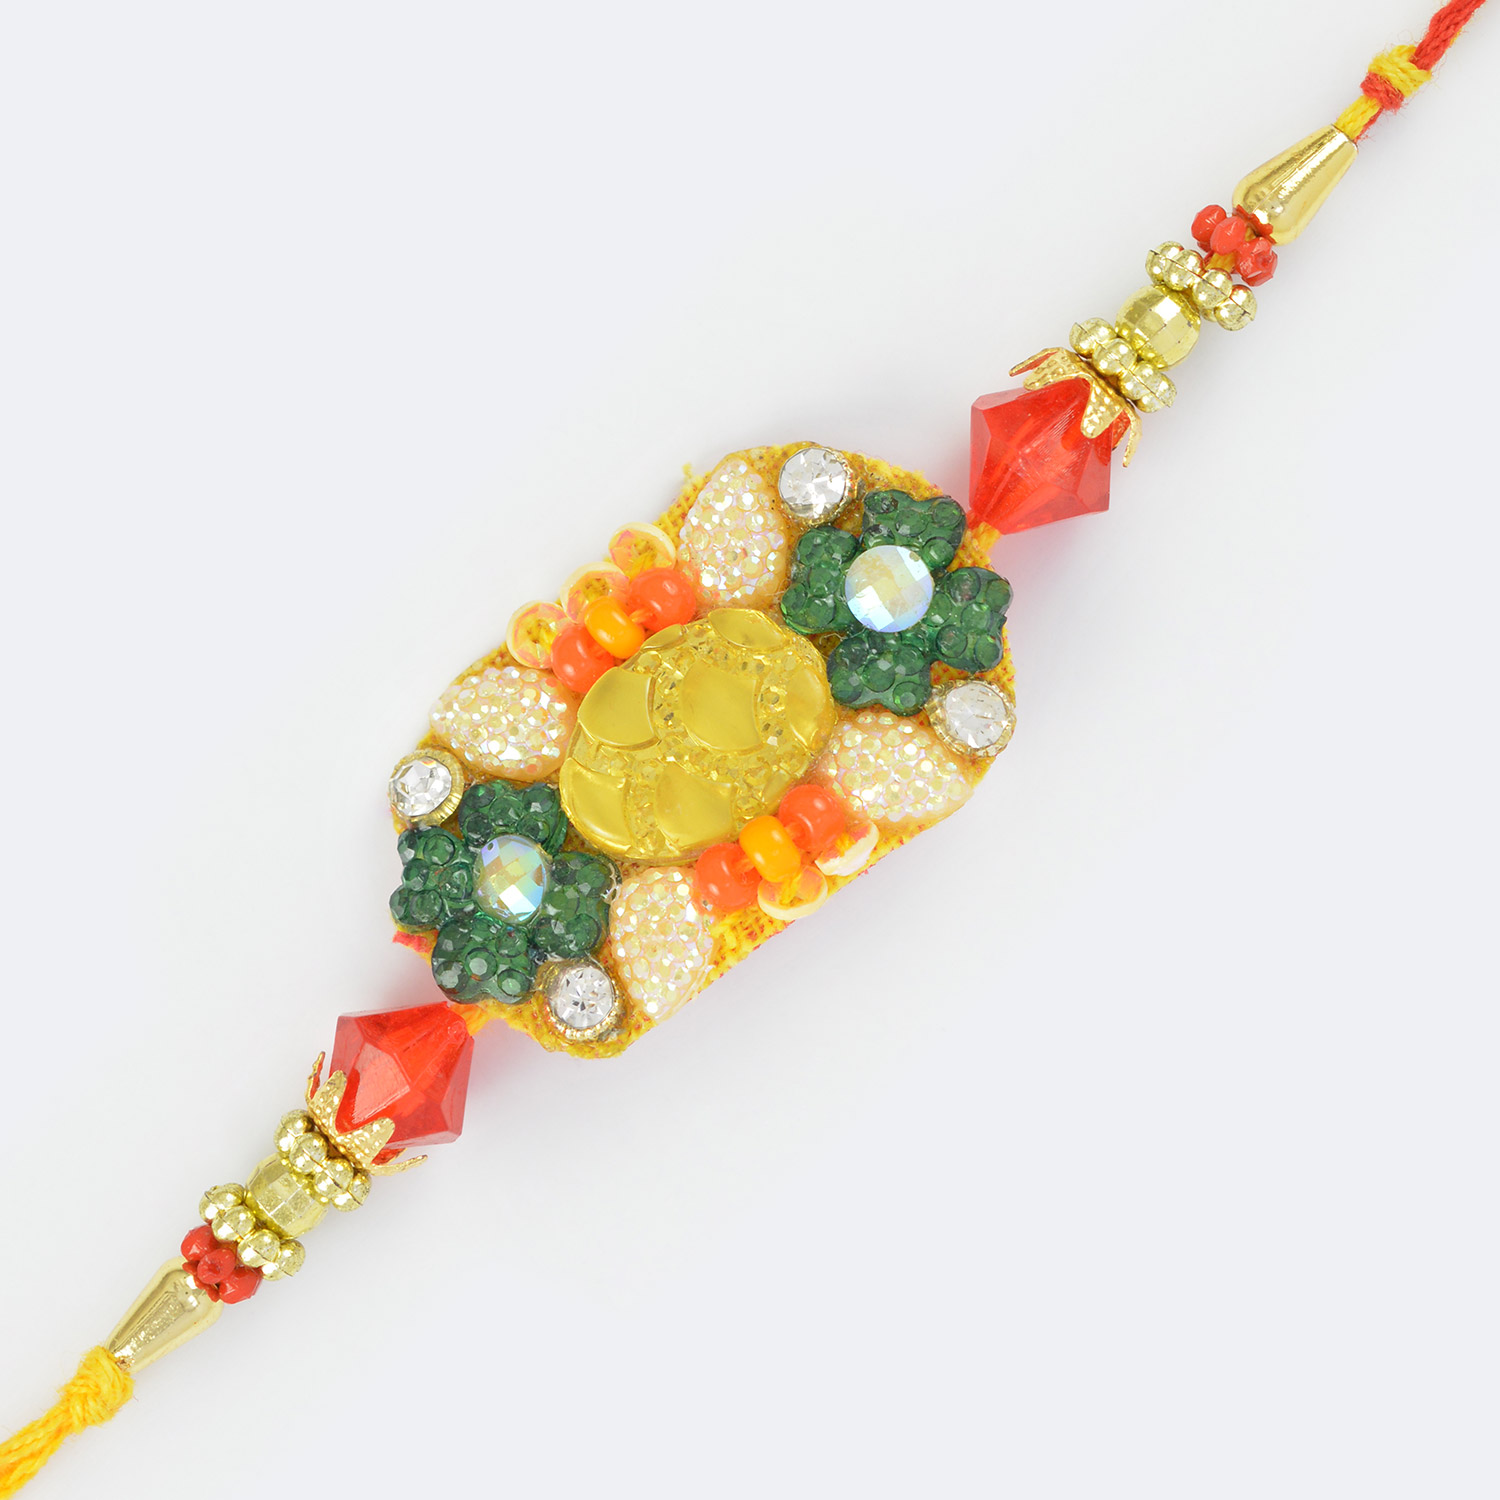 Unconditional Love of Siblings- Colorful Fancy Rakhi for Brother